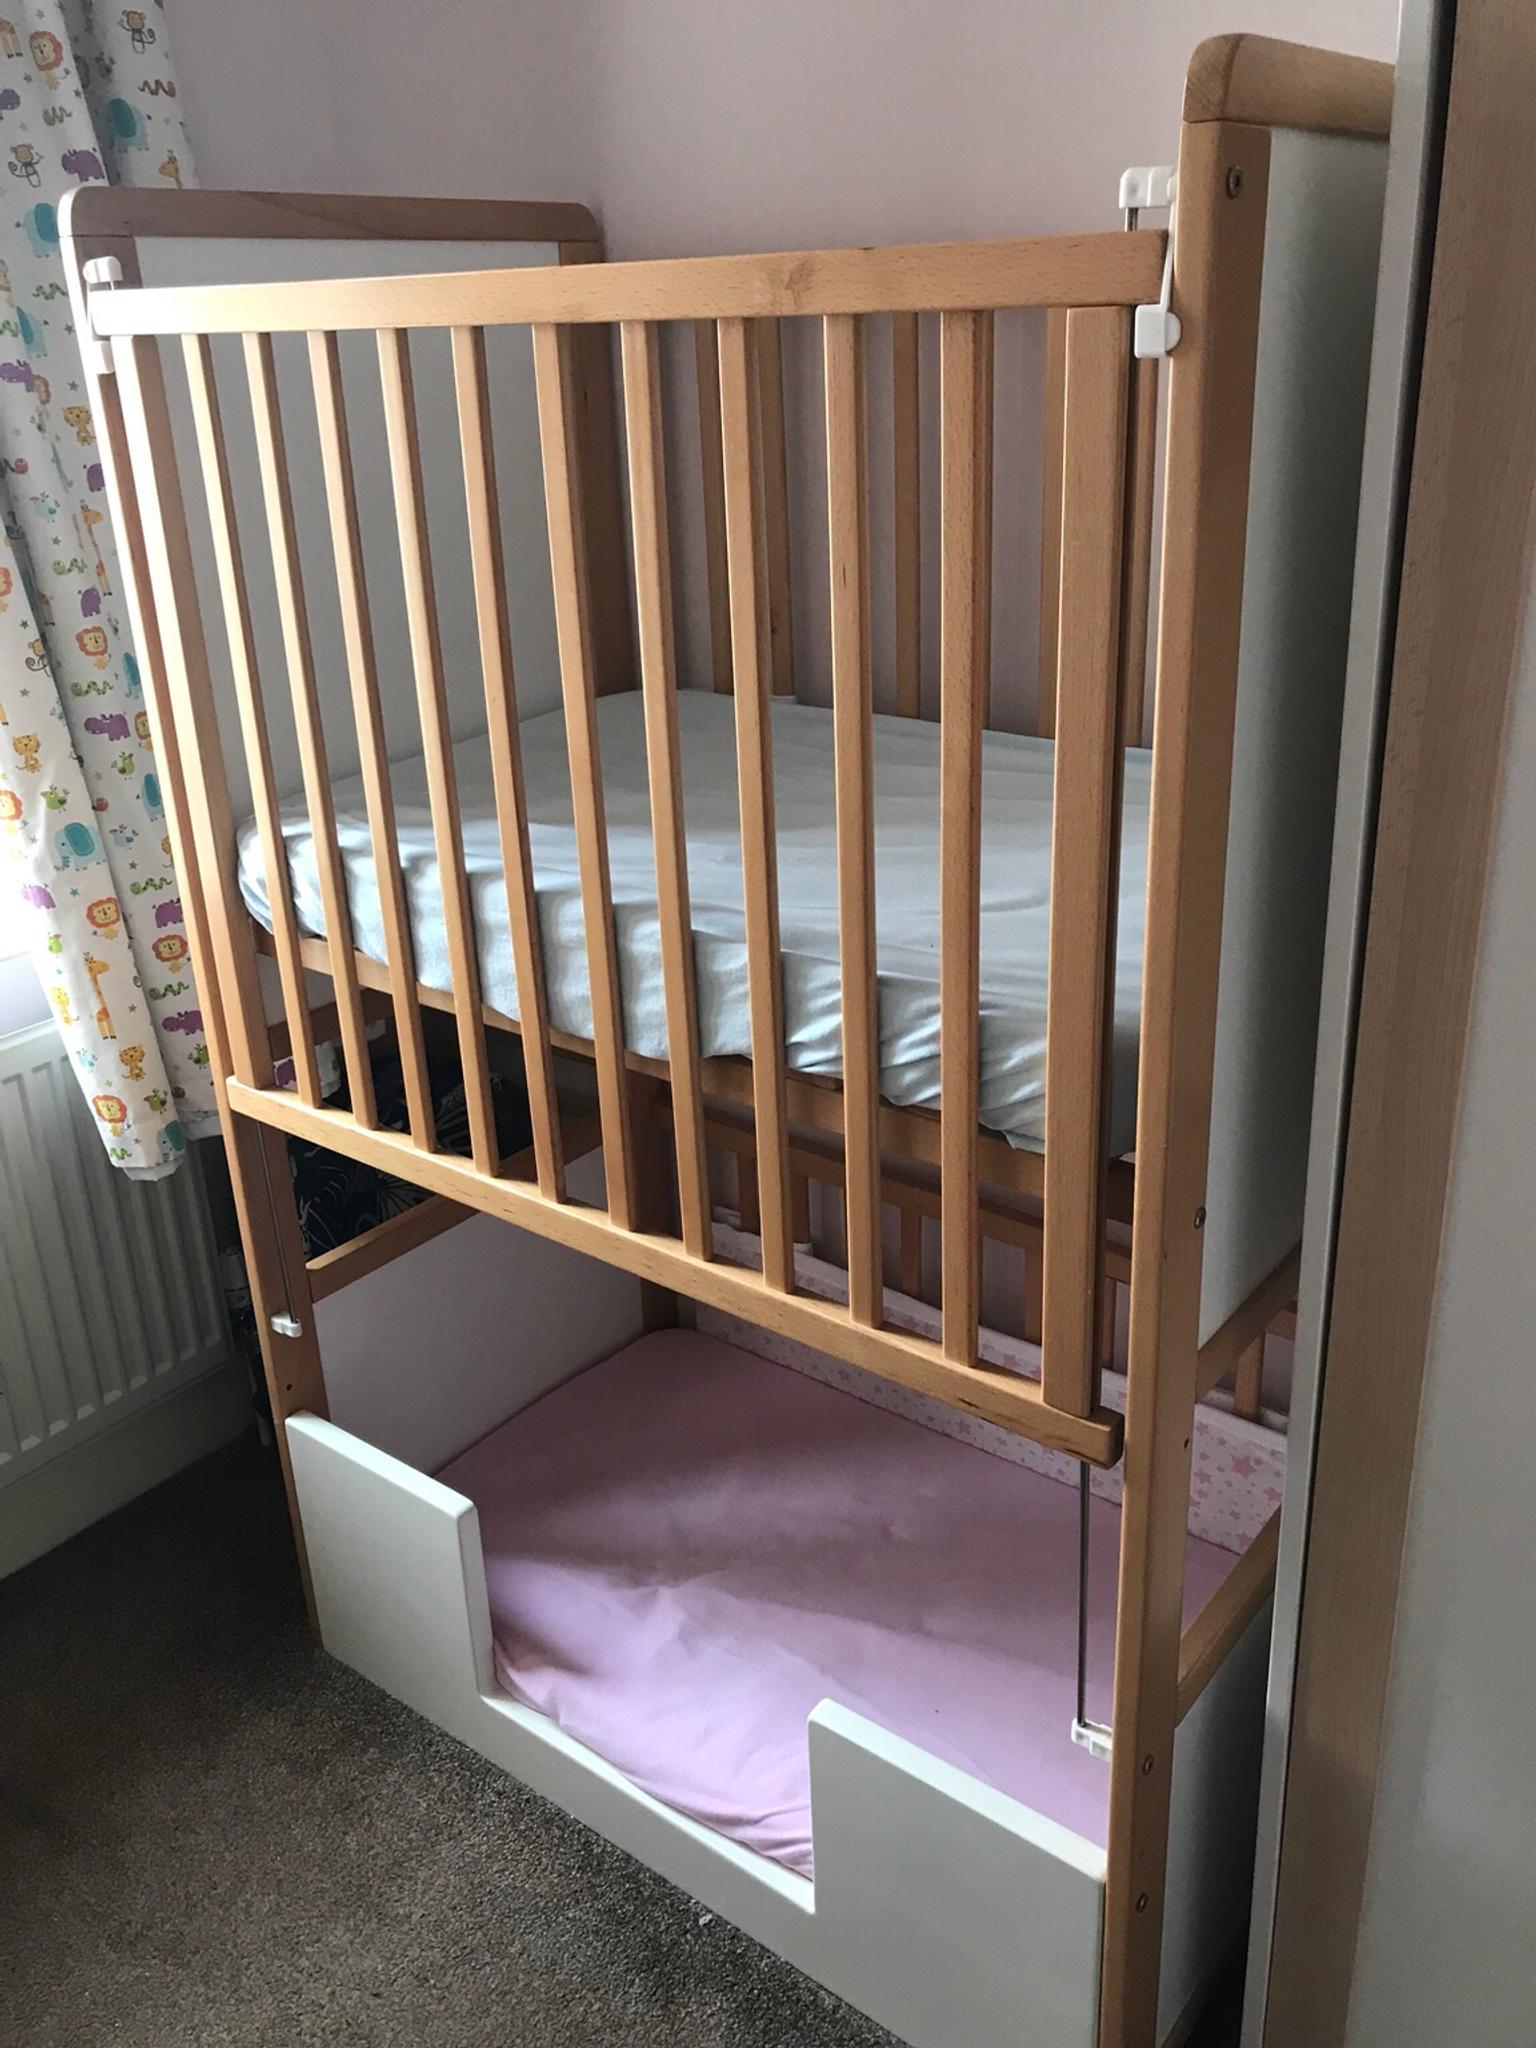 Bunk Bed With Cot Under, Bunk Bed Cots